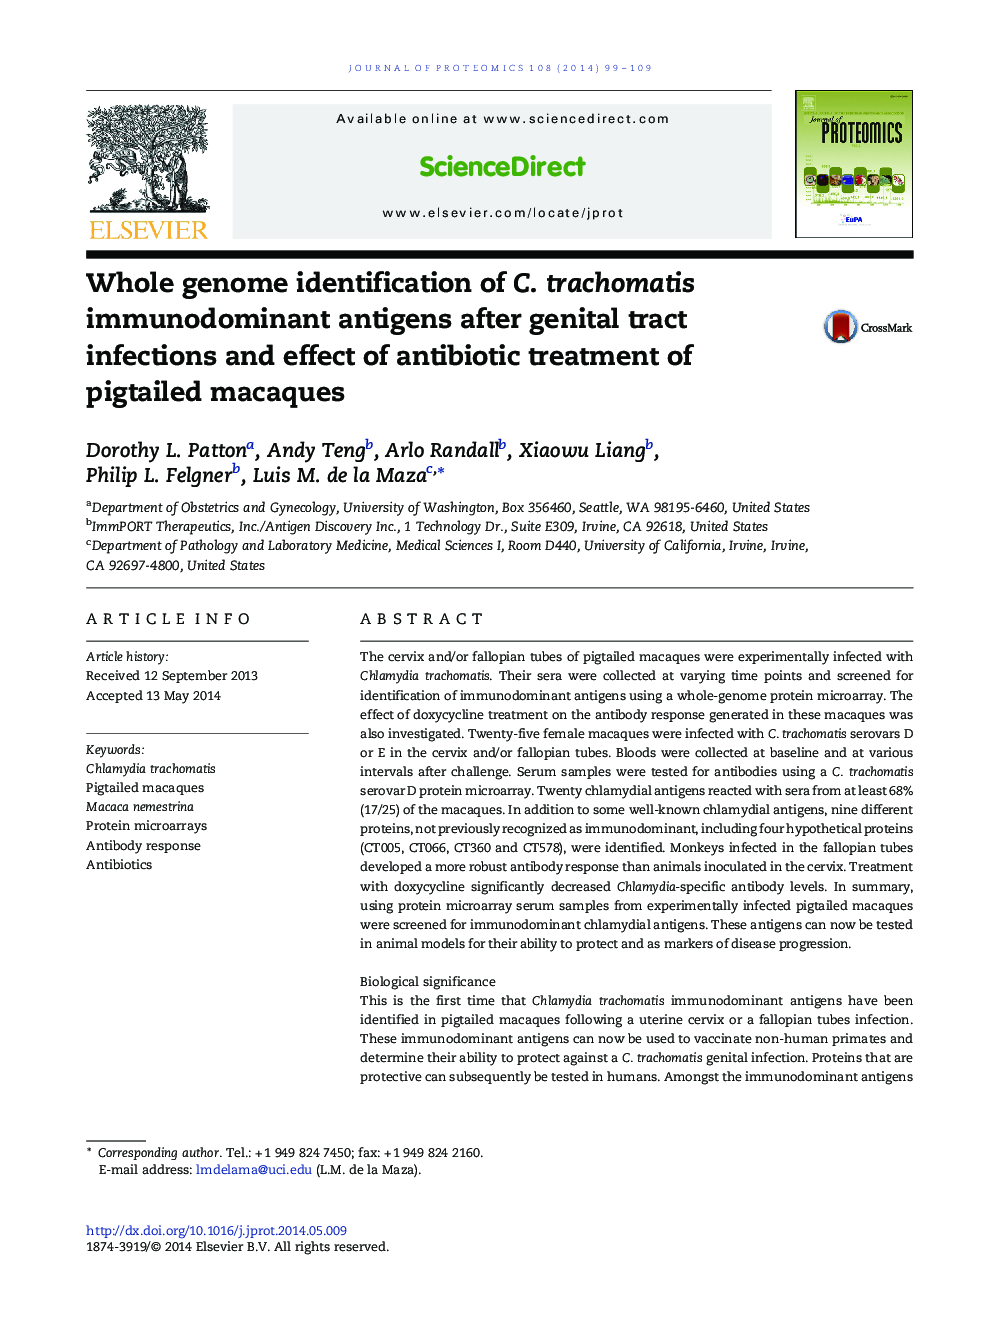 Whole genome identification of C. trachomatis immunodominant antigens after genital tract infections and effect of antibiotic treatment of pigtailed macaques